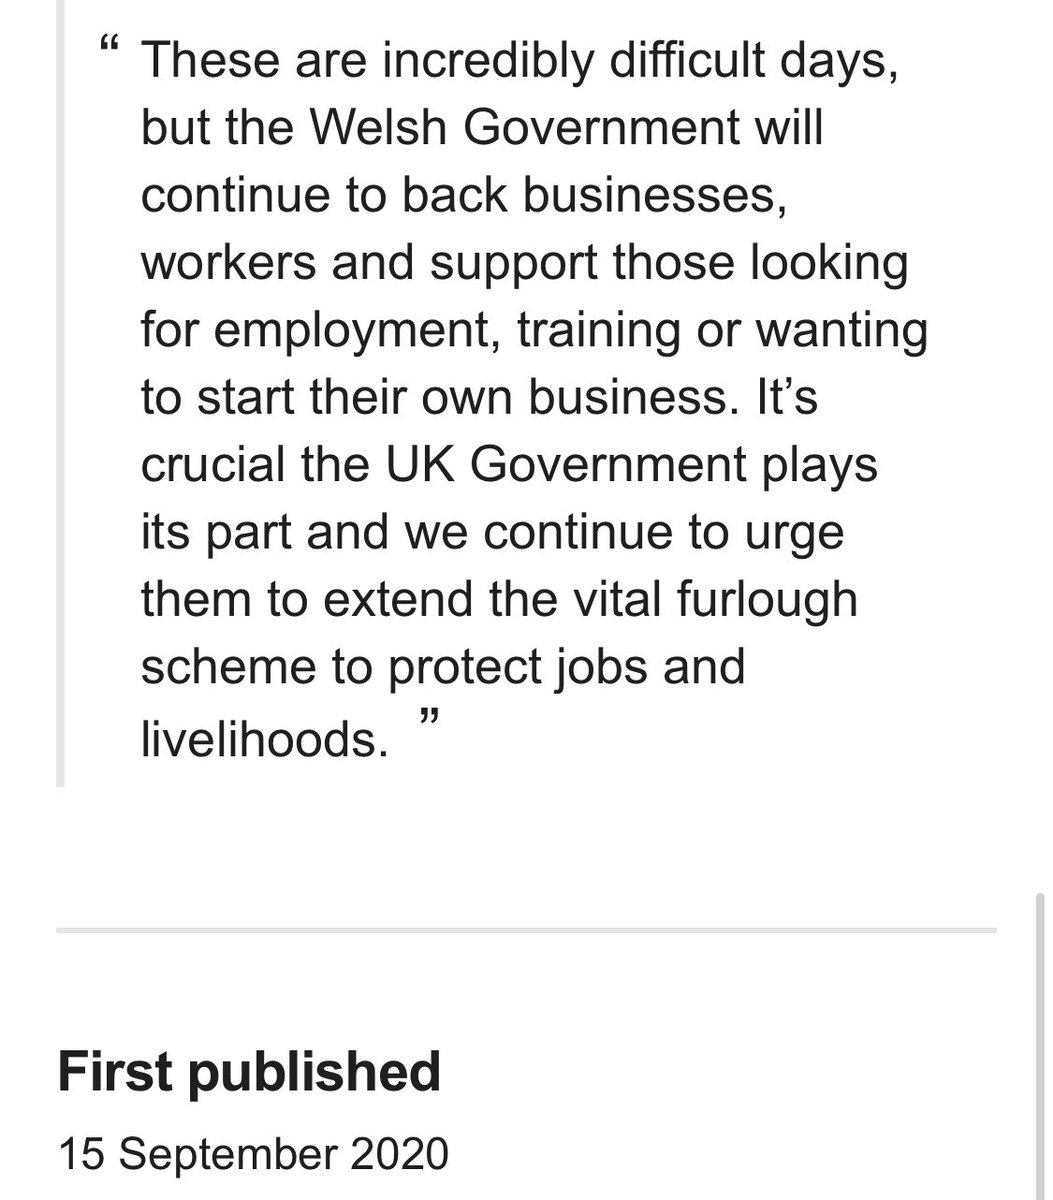 It’s made even more awkward by the requests going back to September from  @KenSkatesMS to erm... “extend the vital furlough scheme to protect jobs and livelihoods.” How about you actually do something and stand up for Welsh workers,  @Simonhartmp?  https://gov.wales/minister-economy-transport-and-north-wales-ken-skates-latest-labour-market-statistics-0